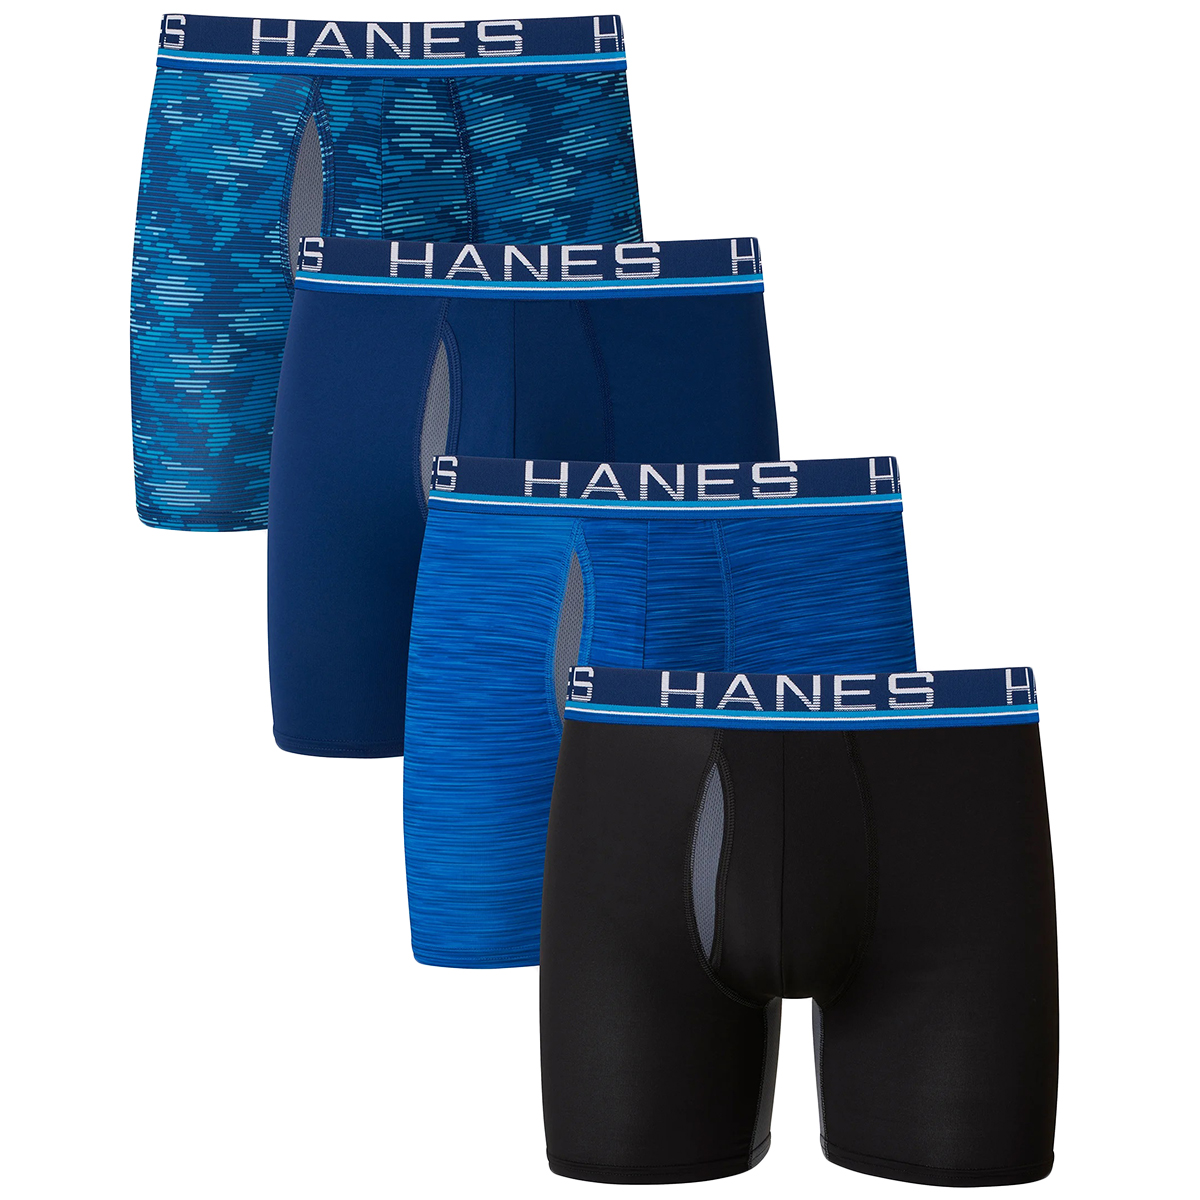 Hanes Sport Men's Total Support Pouch X-Temp Boxer Briefs, 4-Pack Extended Size